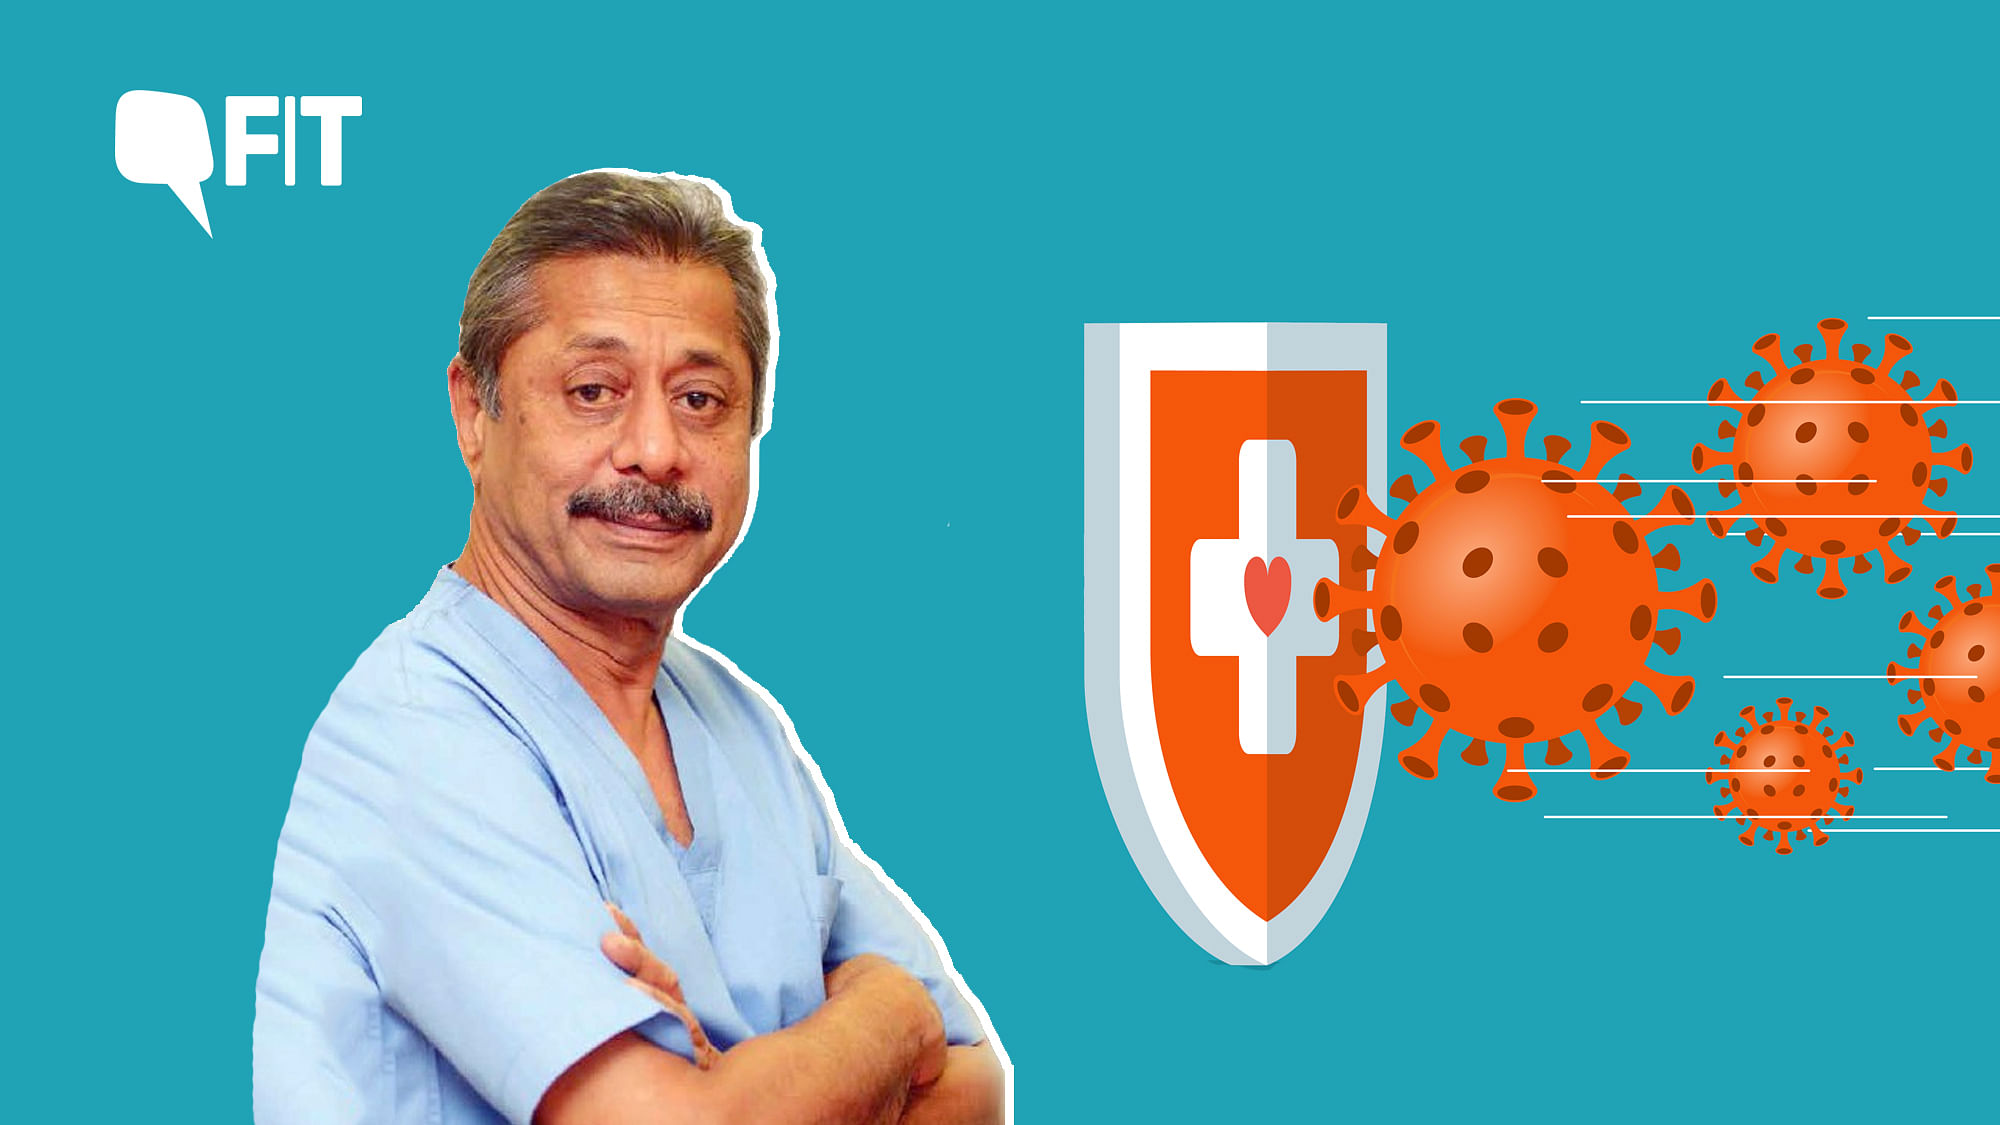 How do you unlock private hospitals and open up amidst COVID crisis? Interview with Dr Naresh Trehan